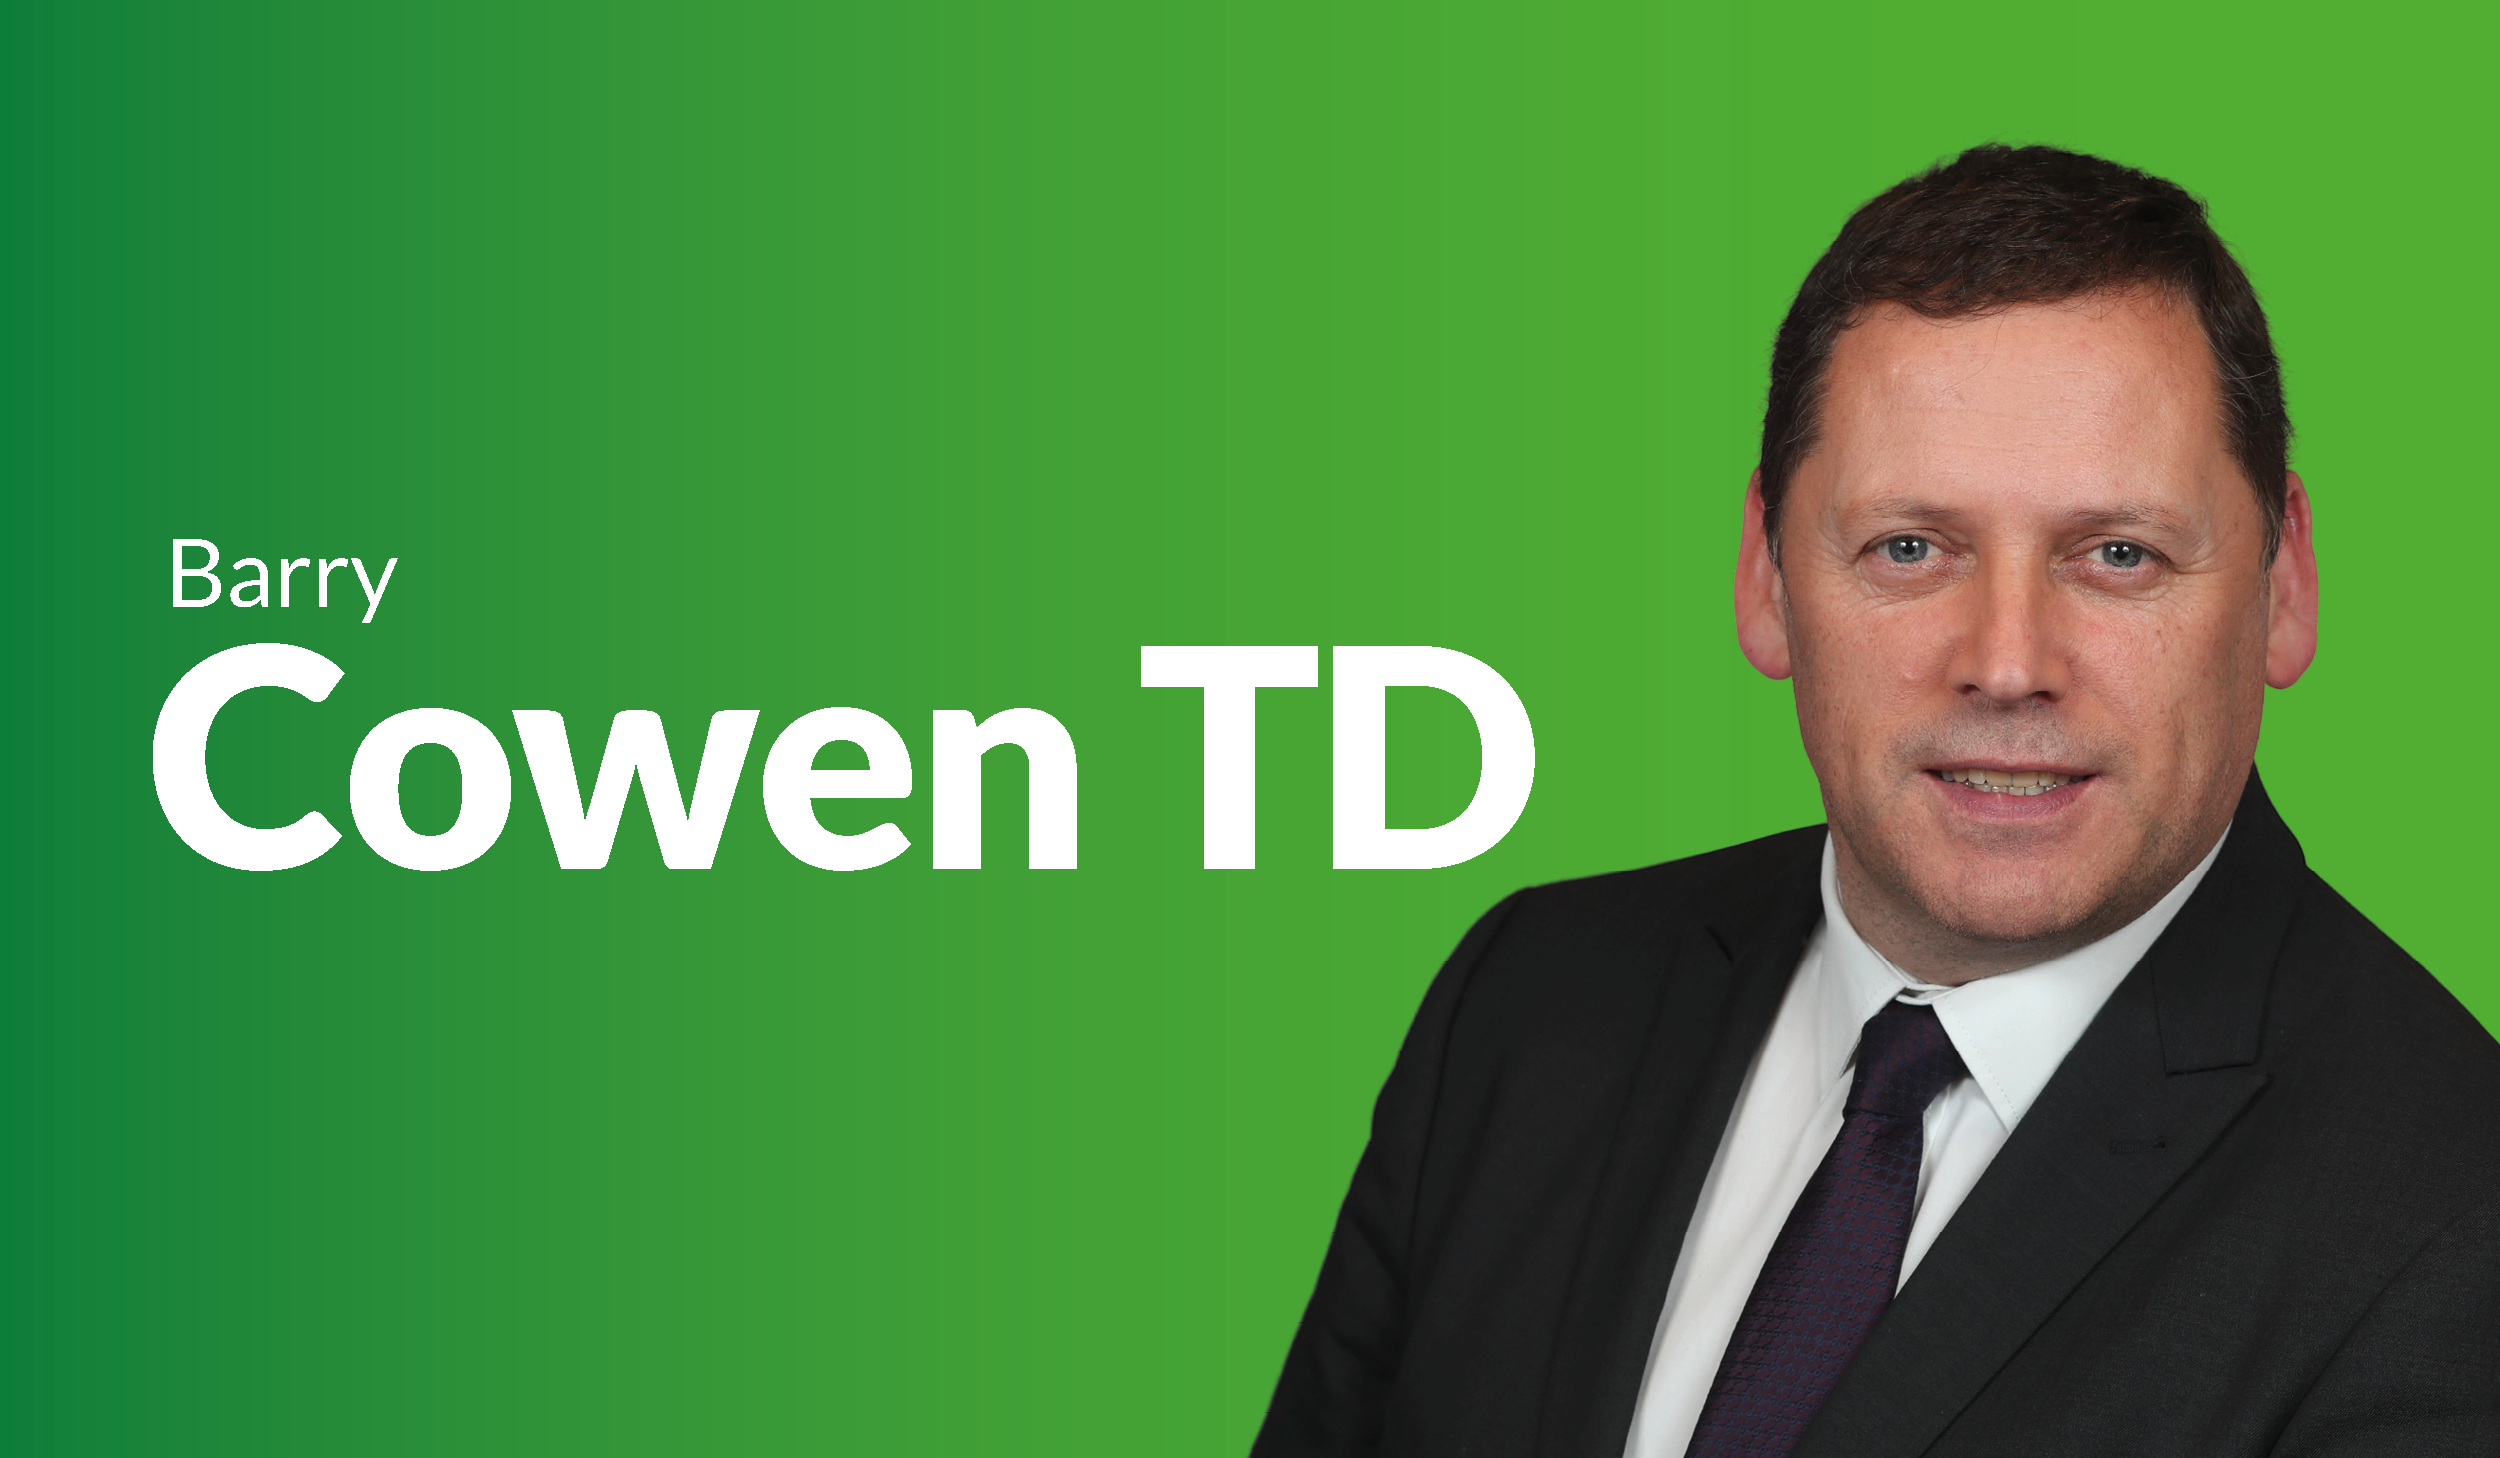 Barry Cowen TD selected as Fianna Fáil Midlands-North-West candidate for European elections